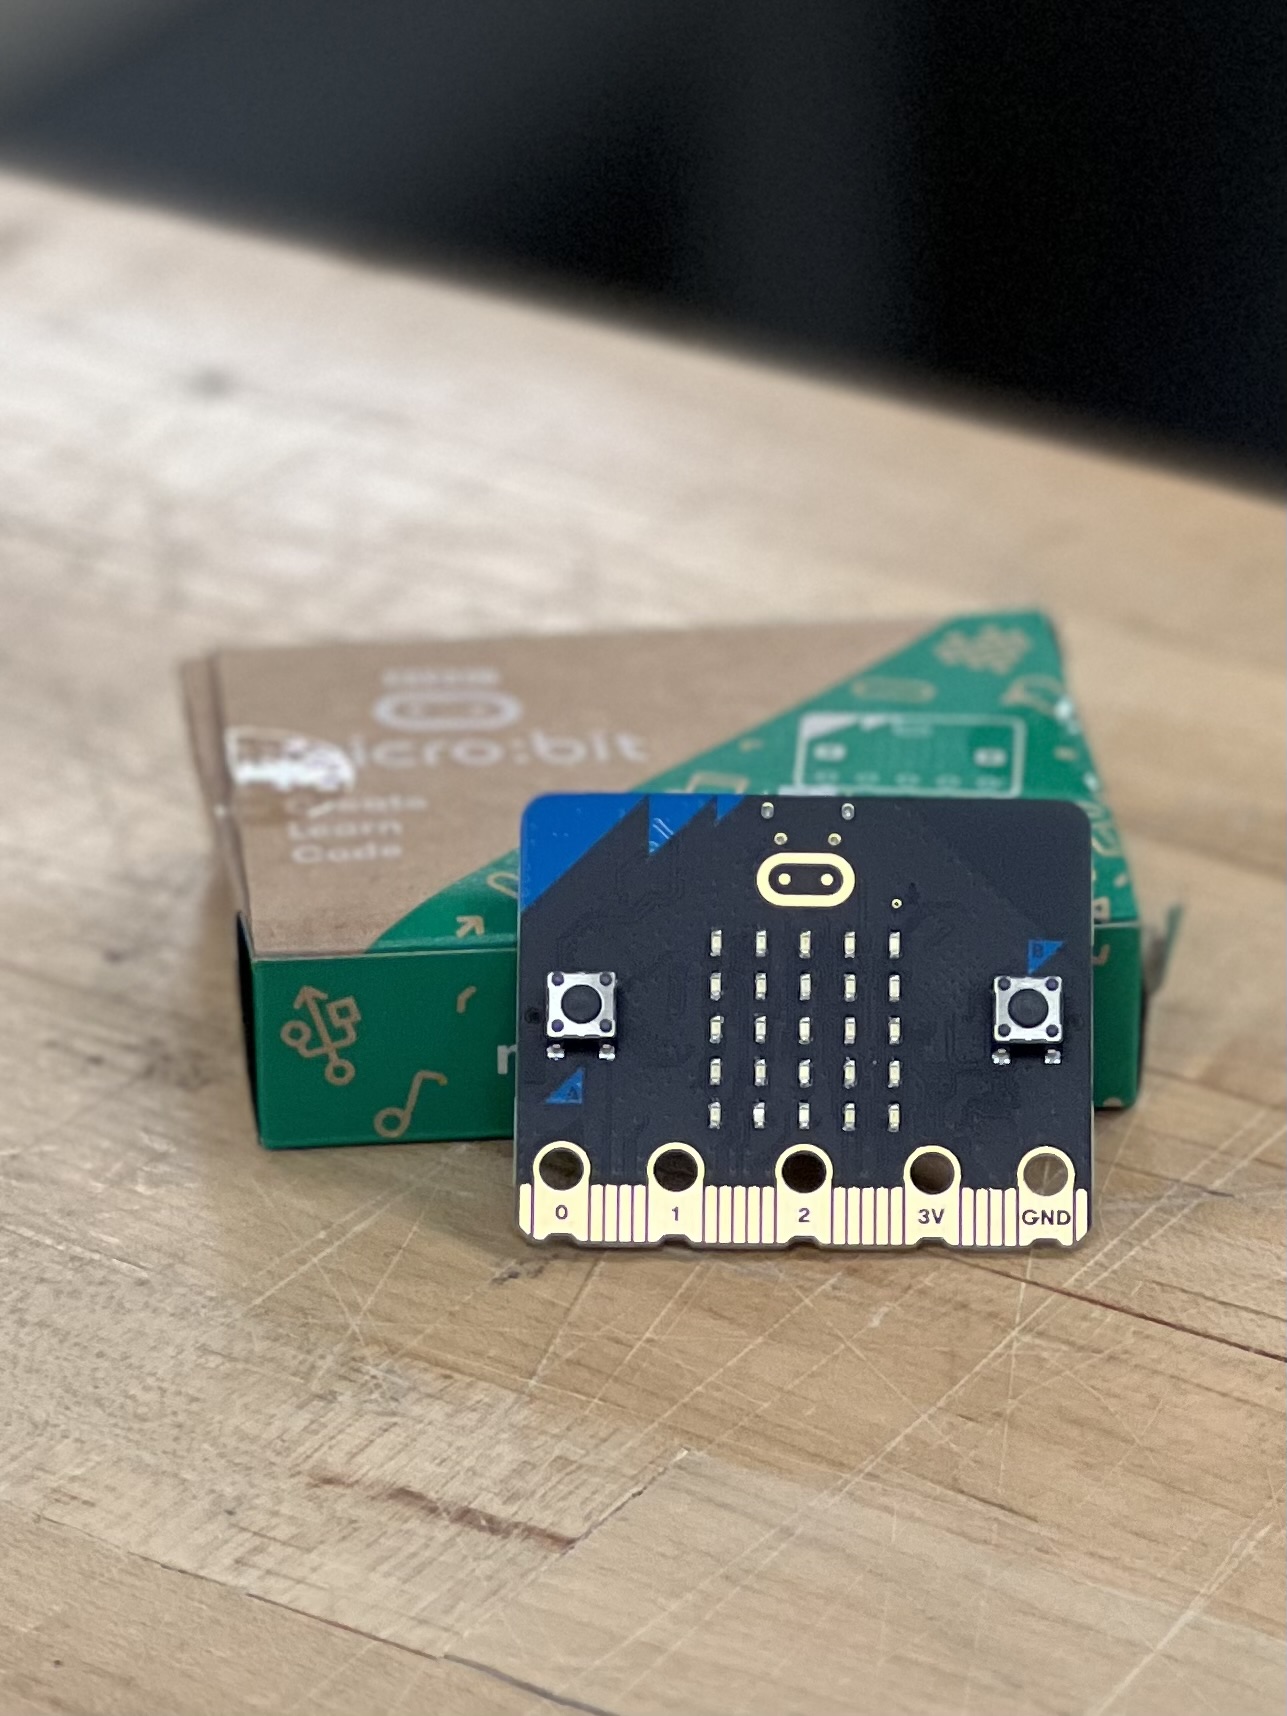 Embedded Systems - Physical Computing and Programming with the Micro:bit